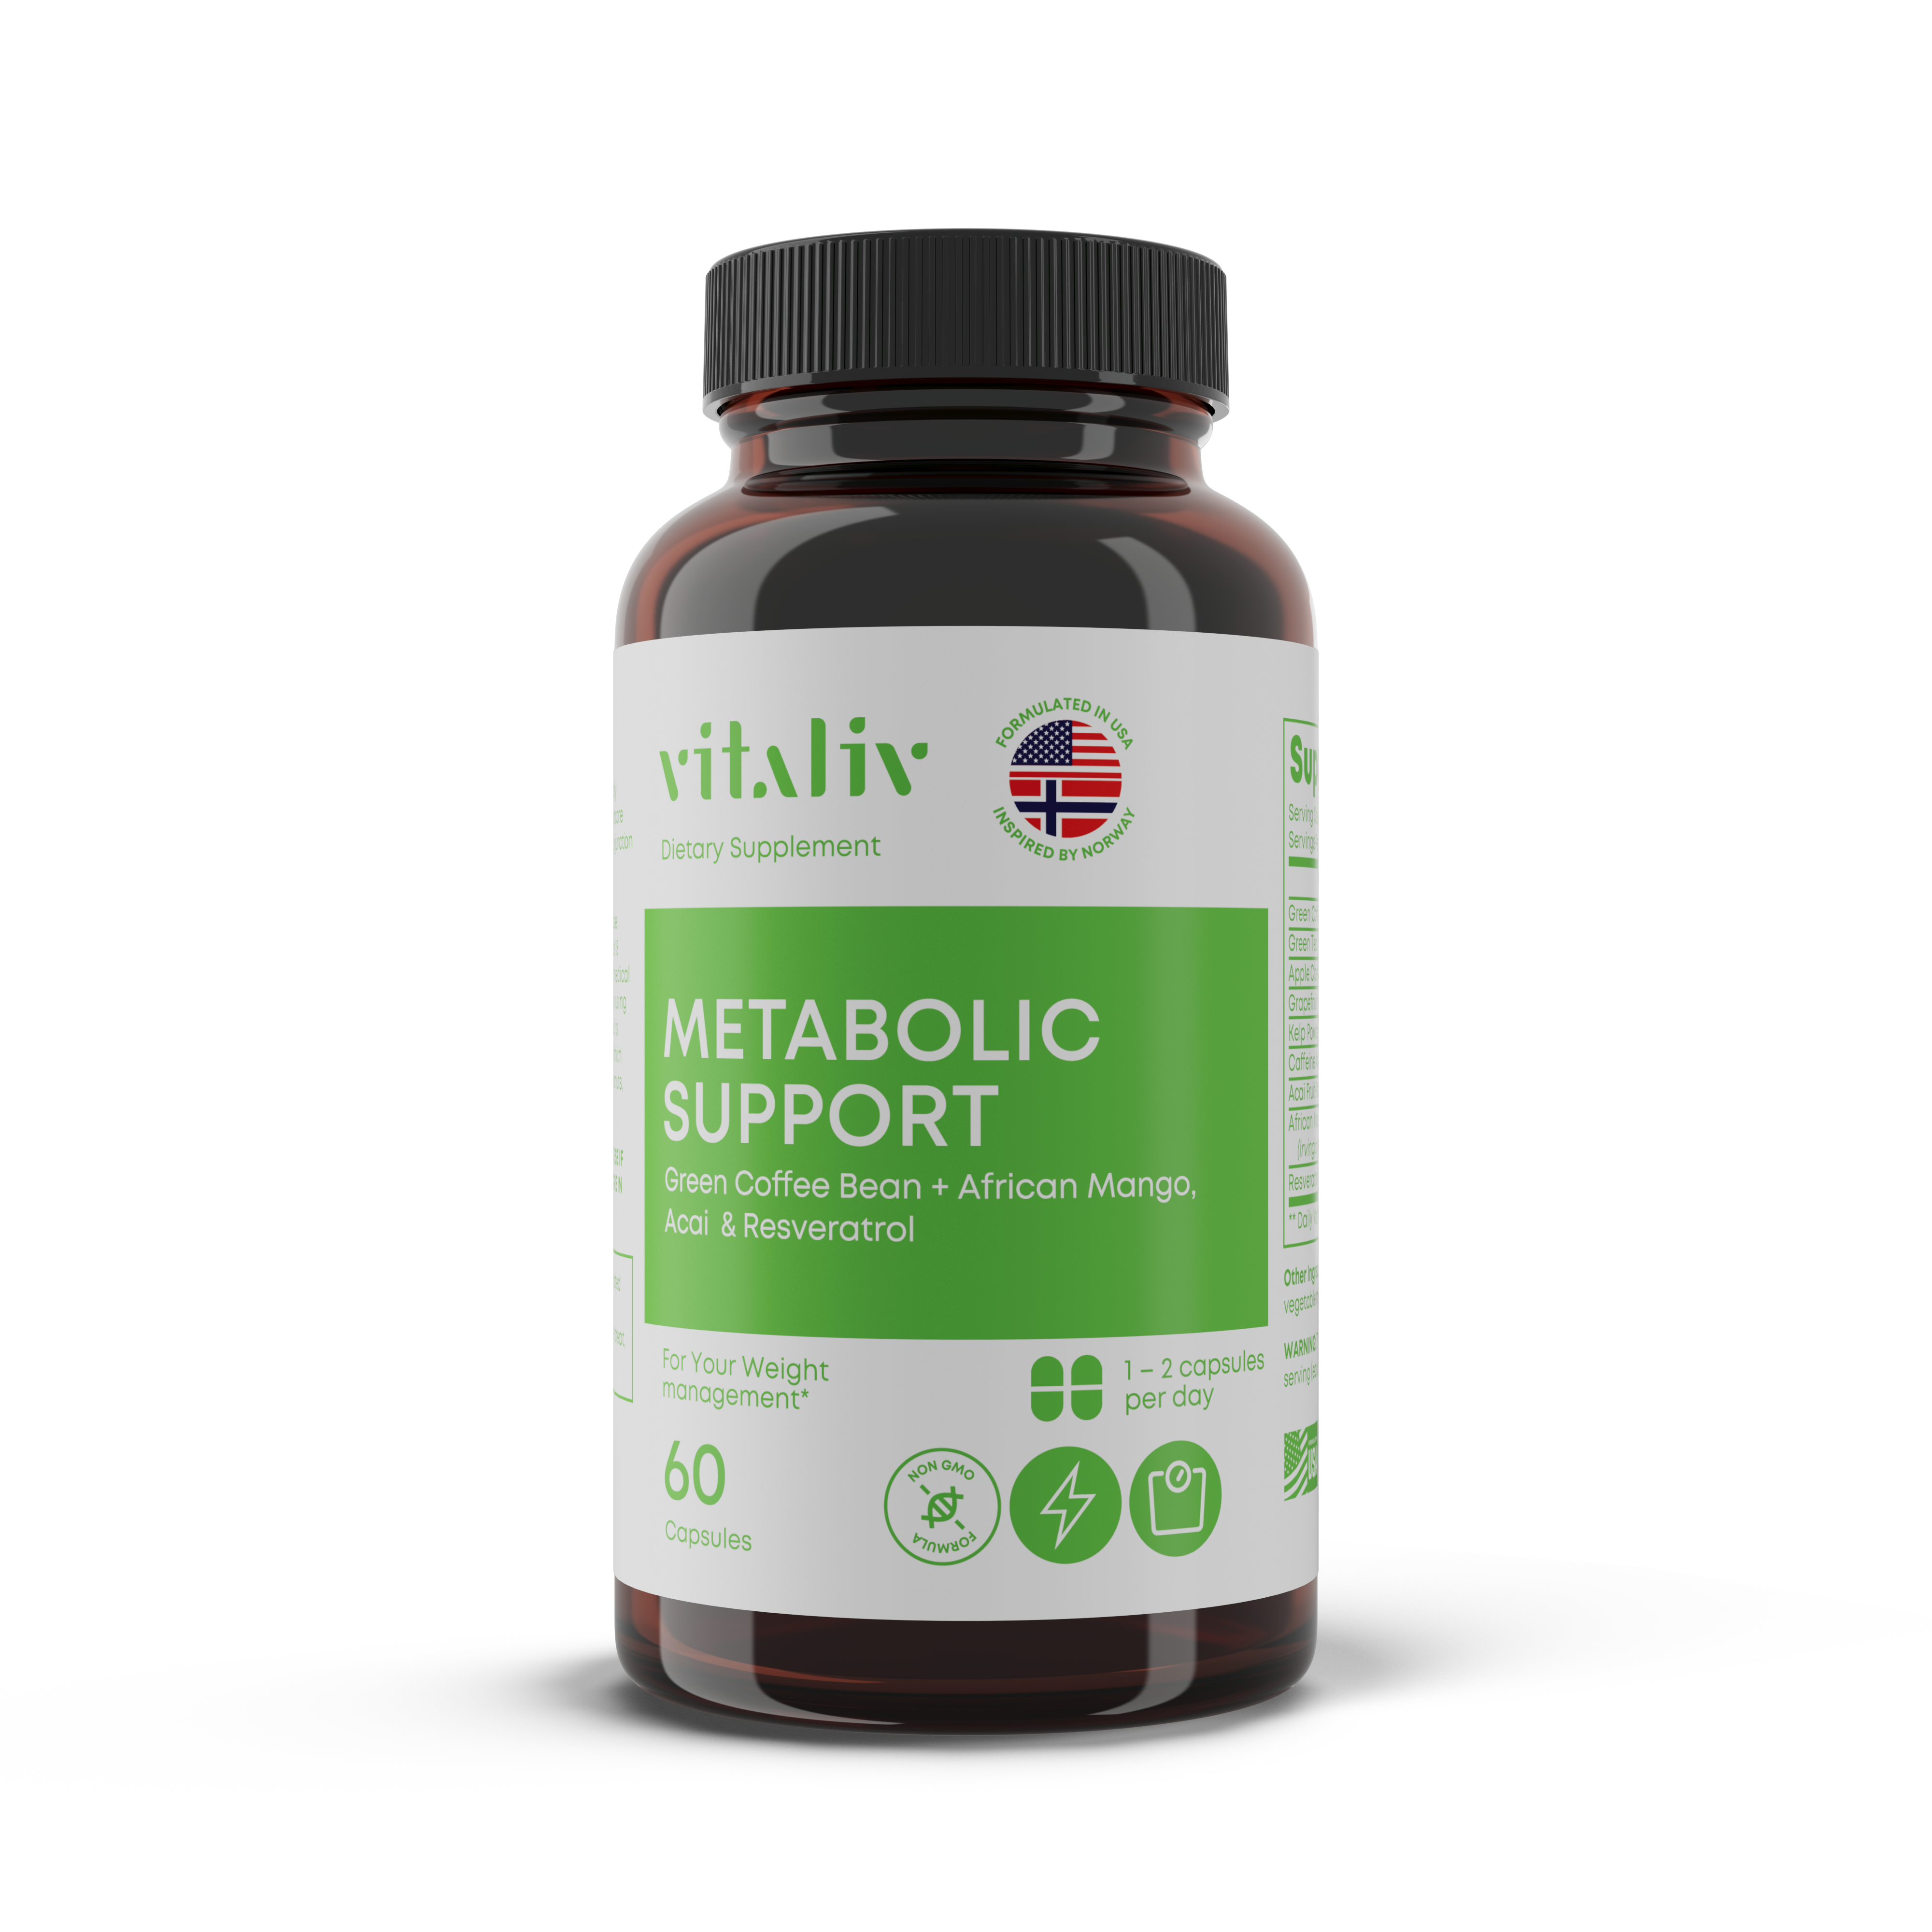 Metabolic support for weight management